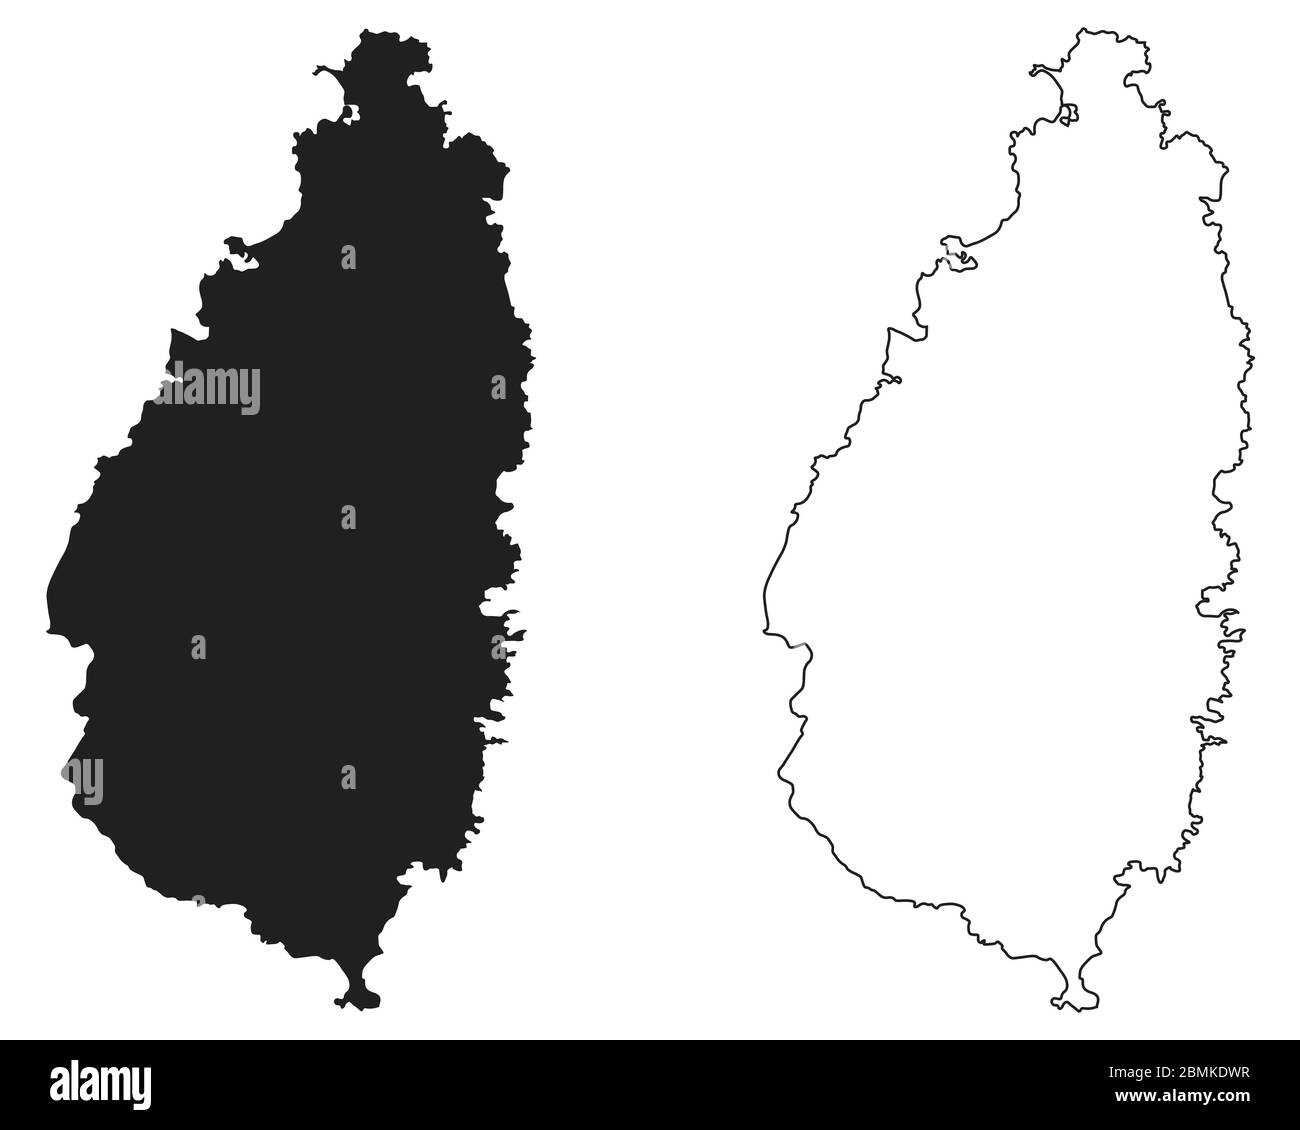 Saint Lucia Country Map. Black silhouette and outline isolated on white background. EPS Vector Stock Vector